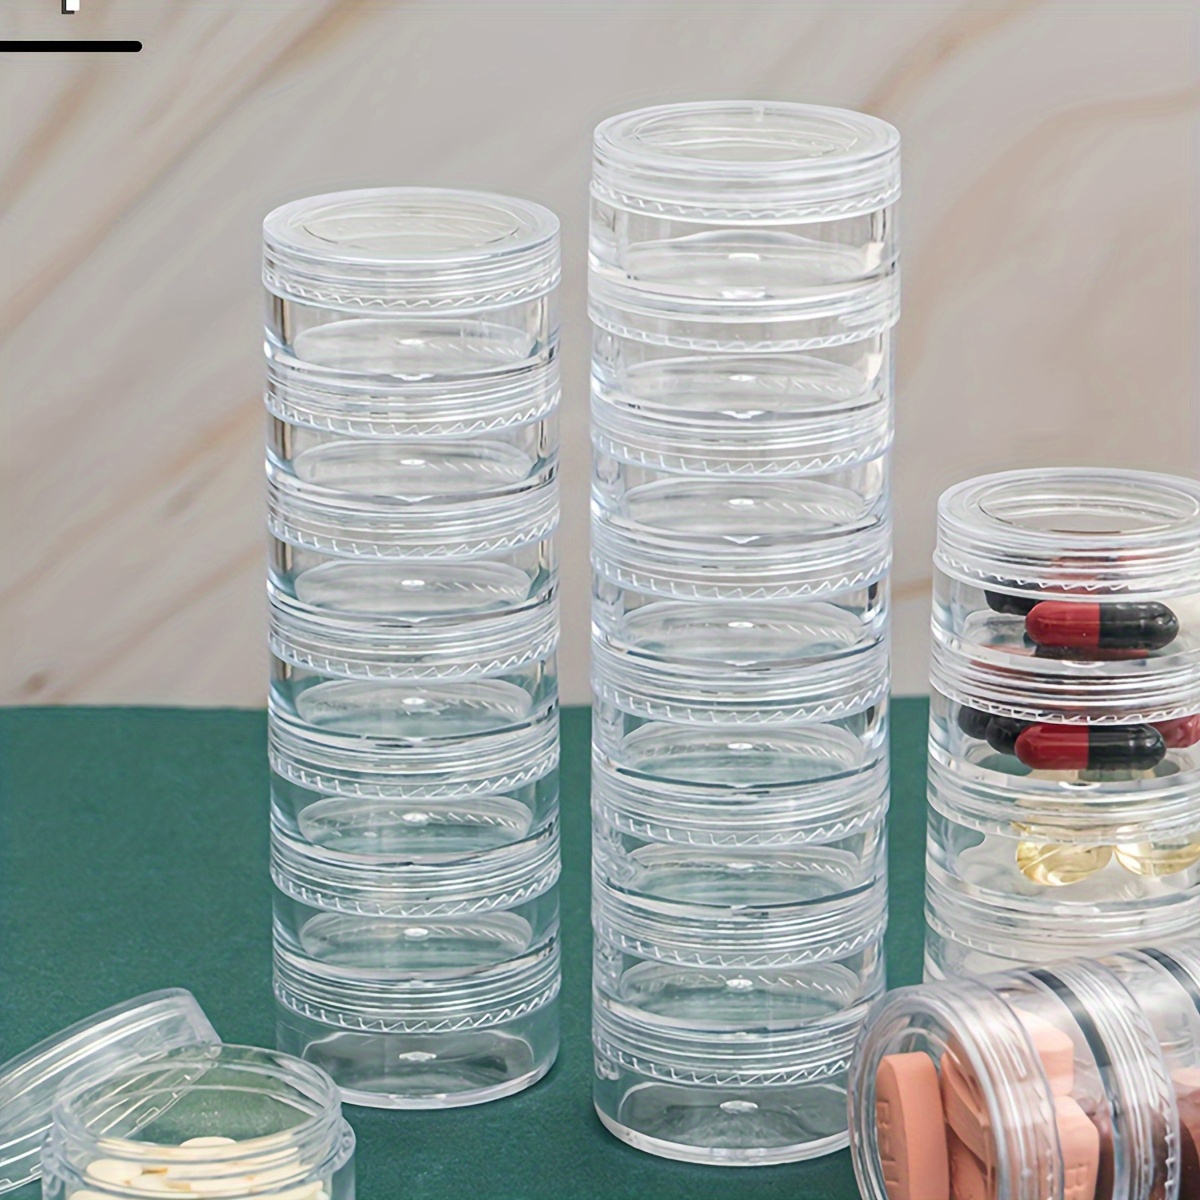 

1pc Clear Plastic 7-layer Pill Box, Portable Travel Weekly Pill Organizer, Compact Size (1.38*4.41iinch) Refill Dispenser For Medications And Supplements